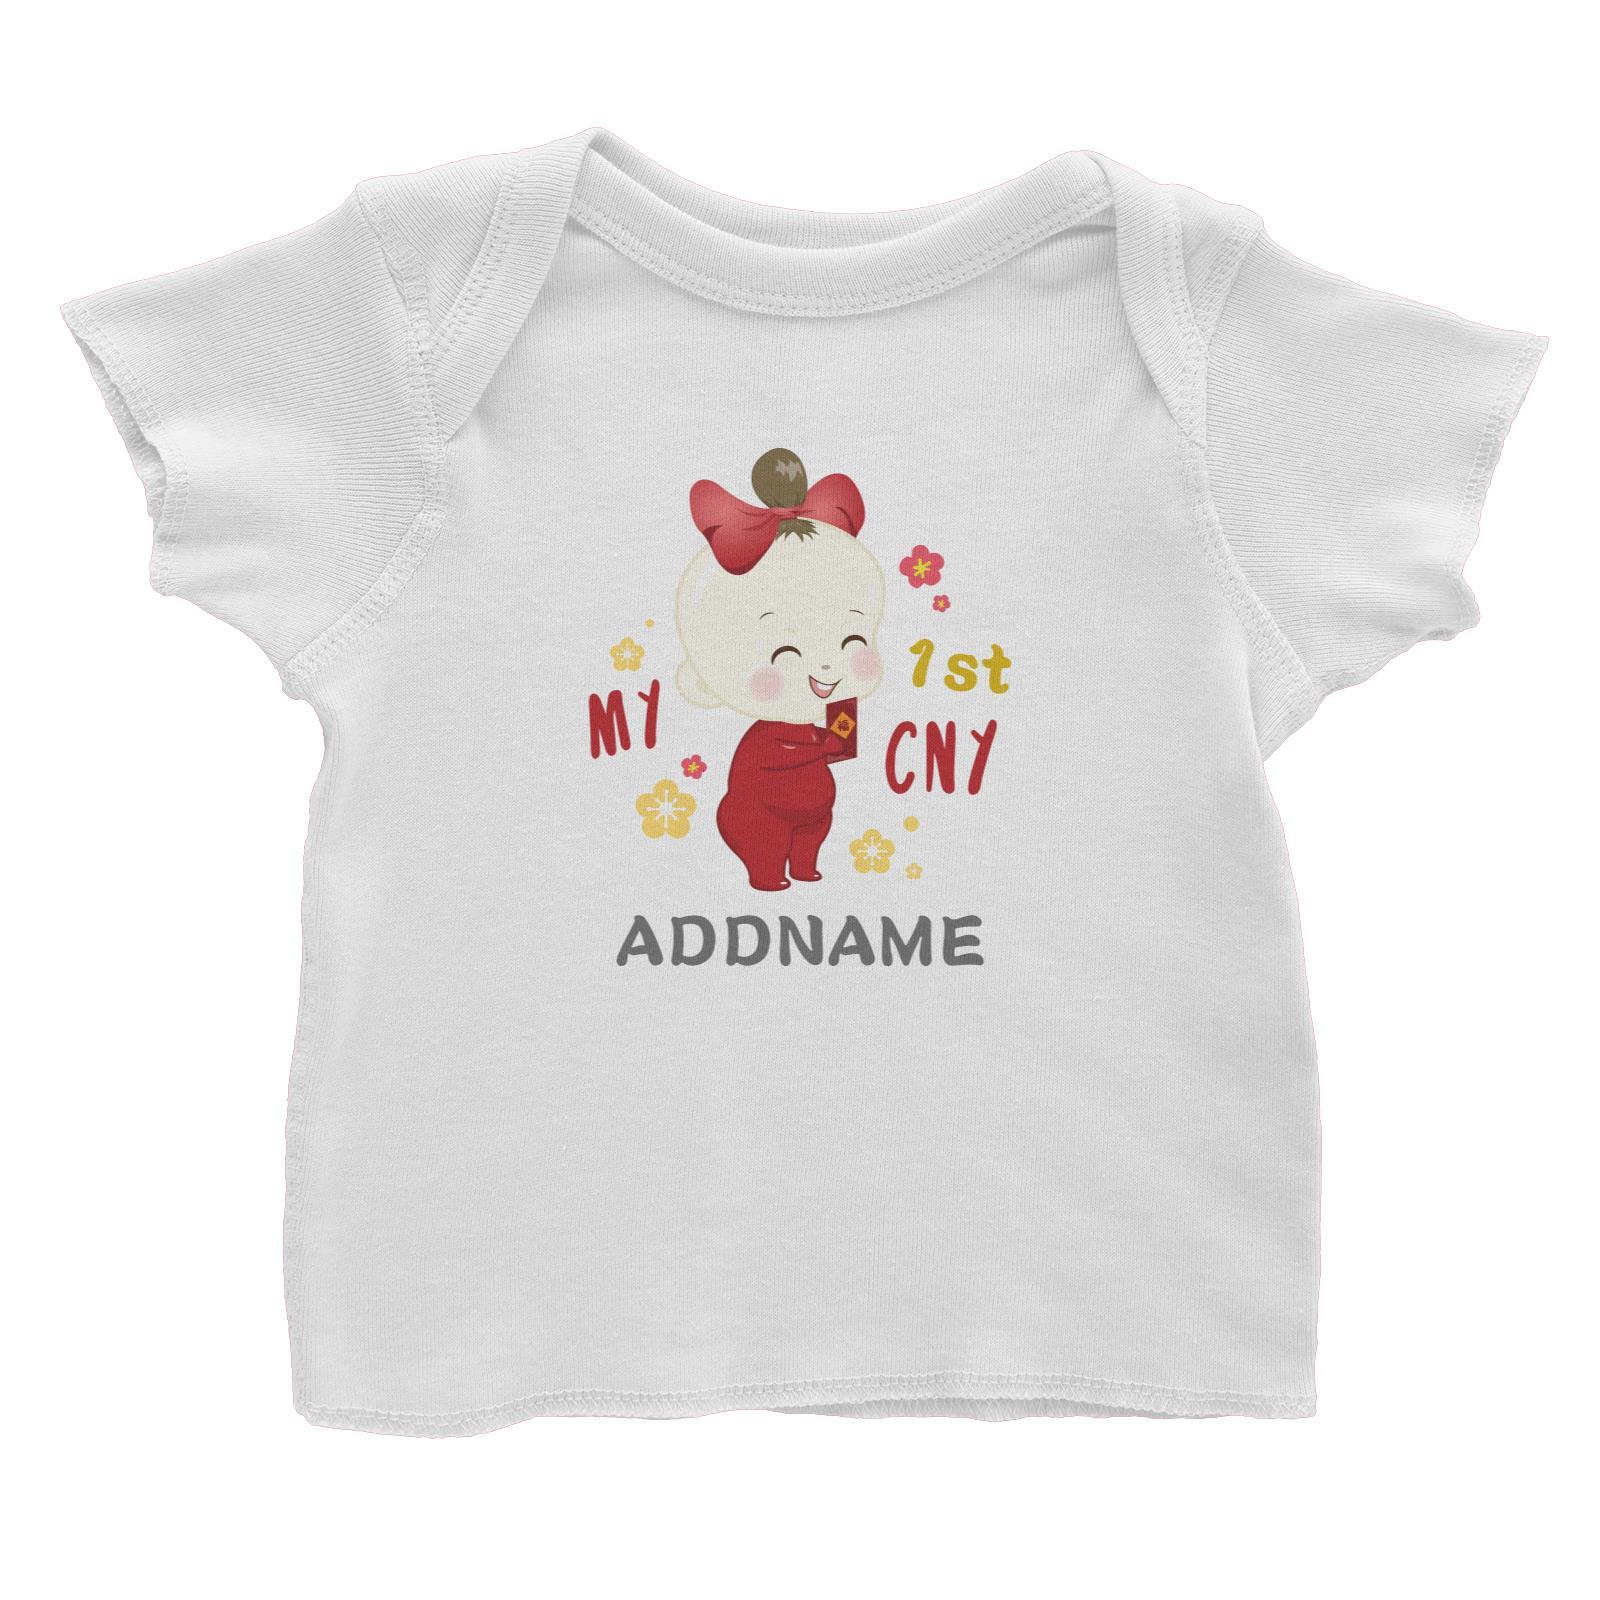 Chinese New Year Family My 1st CNY Baby Girl Addname Baby T-Shirt